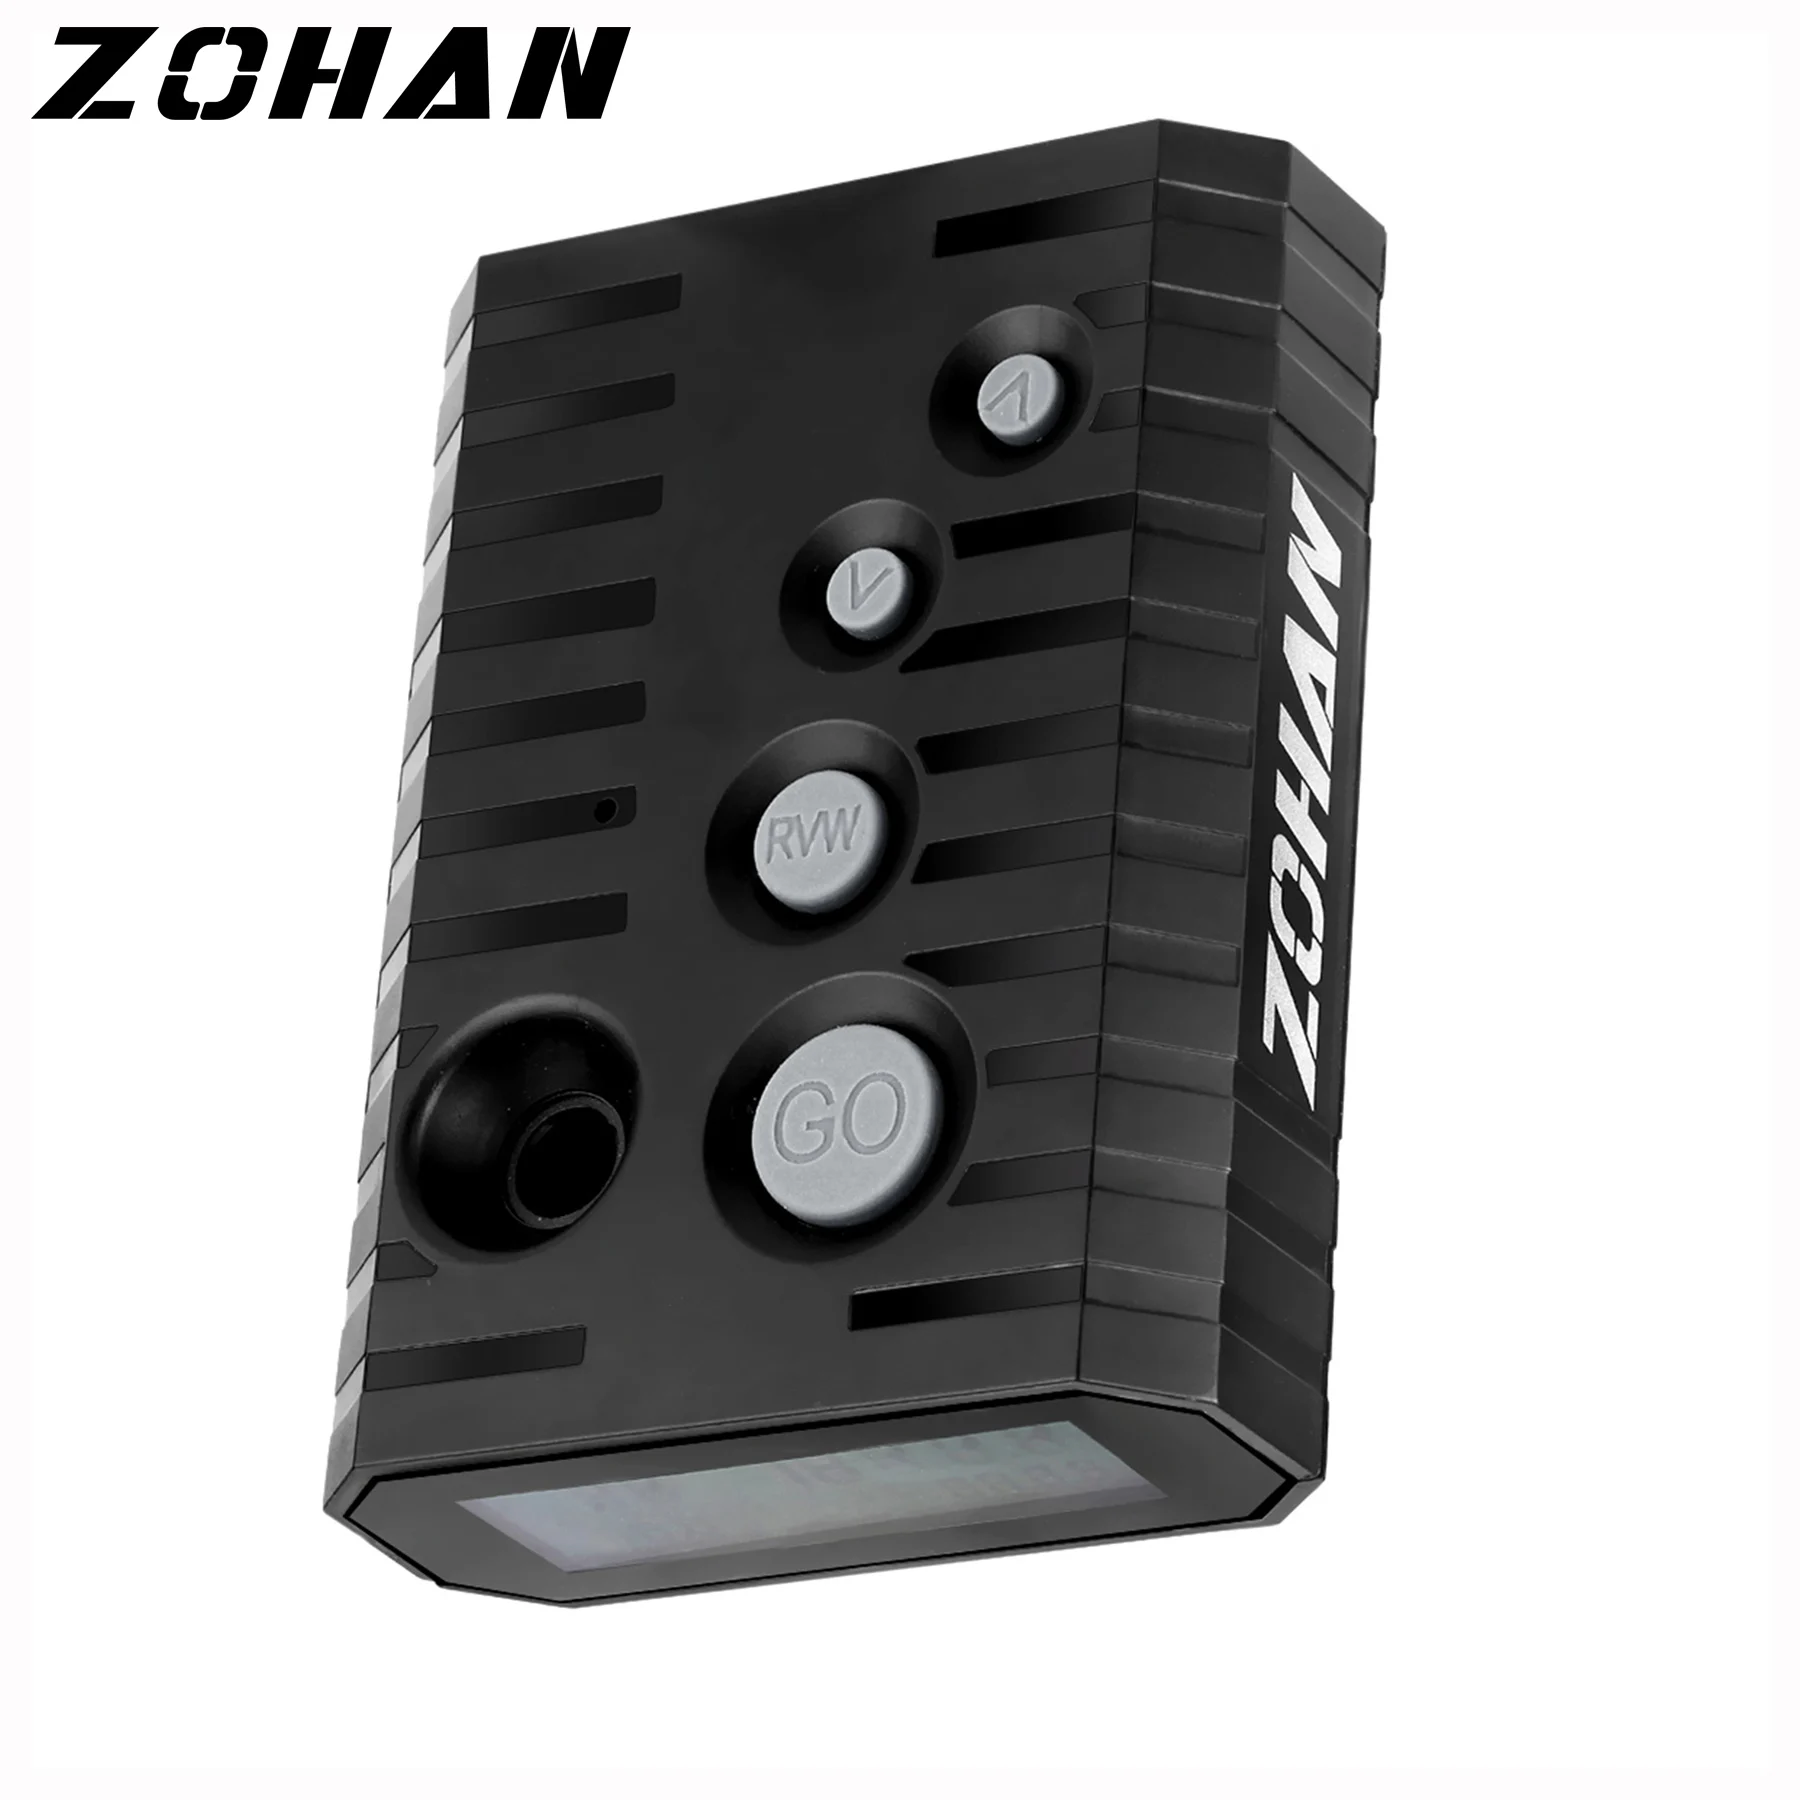 

ZOHAN Shot Timers Shooting Timer for Firearms Airsoft Stop Watch Steel Challenge Competition Timer Multiple Shot use with Buzzer